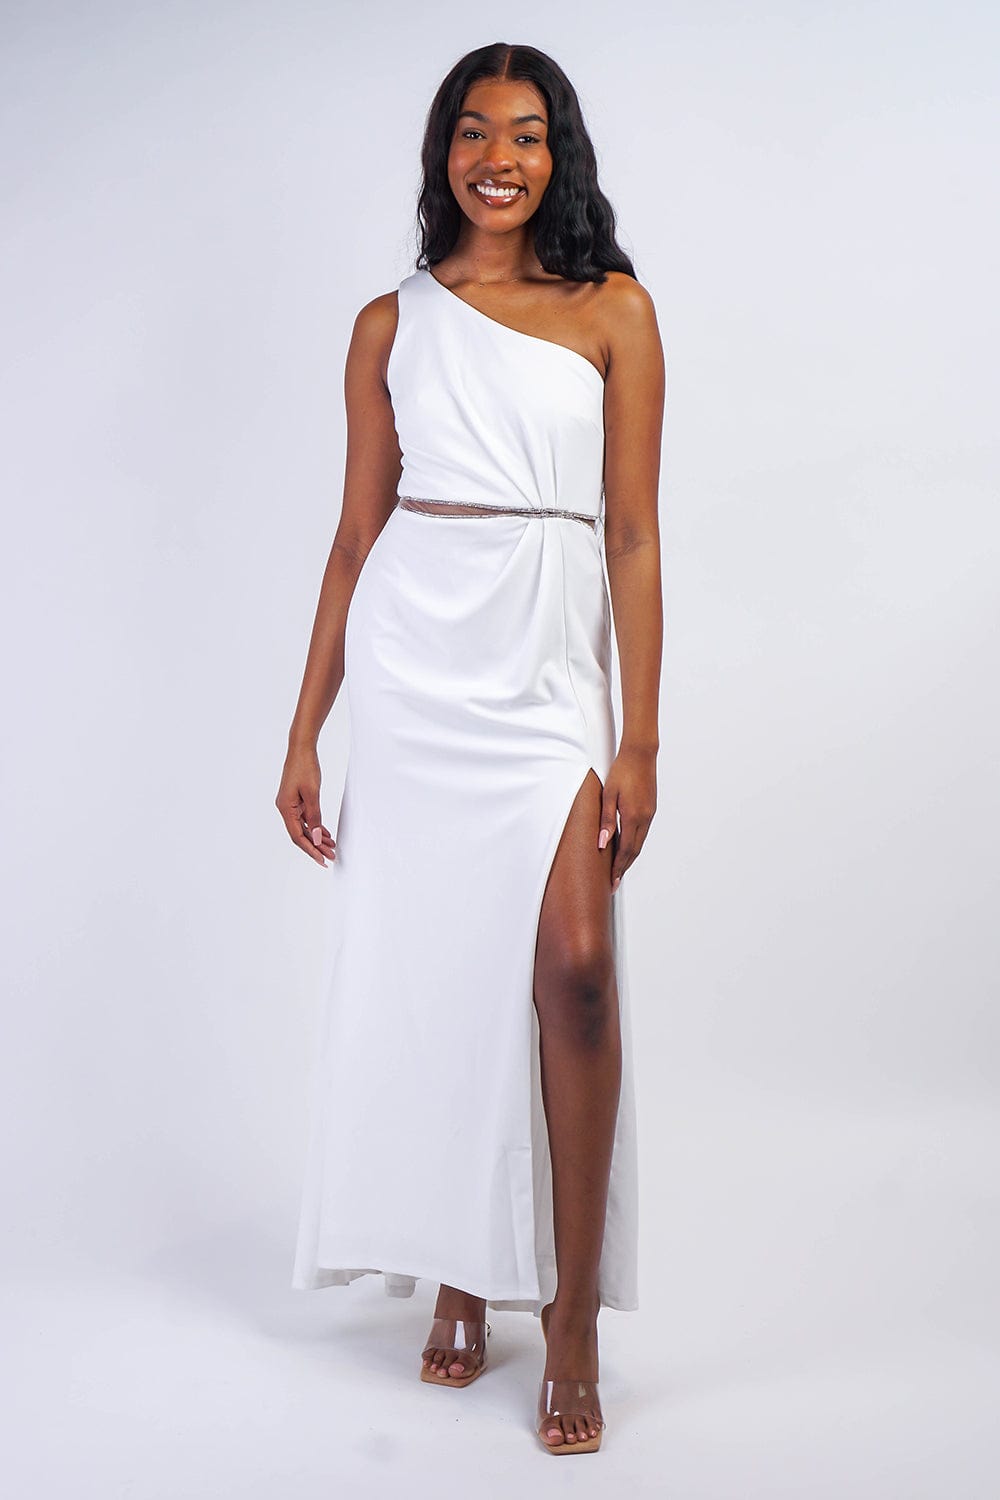 GOWNS White One Shoulder Crystal Trim Gown - Chloe Dao